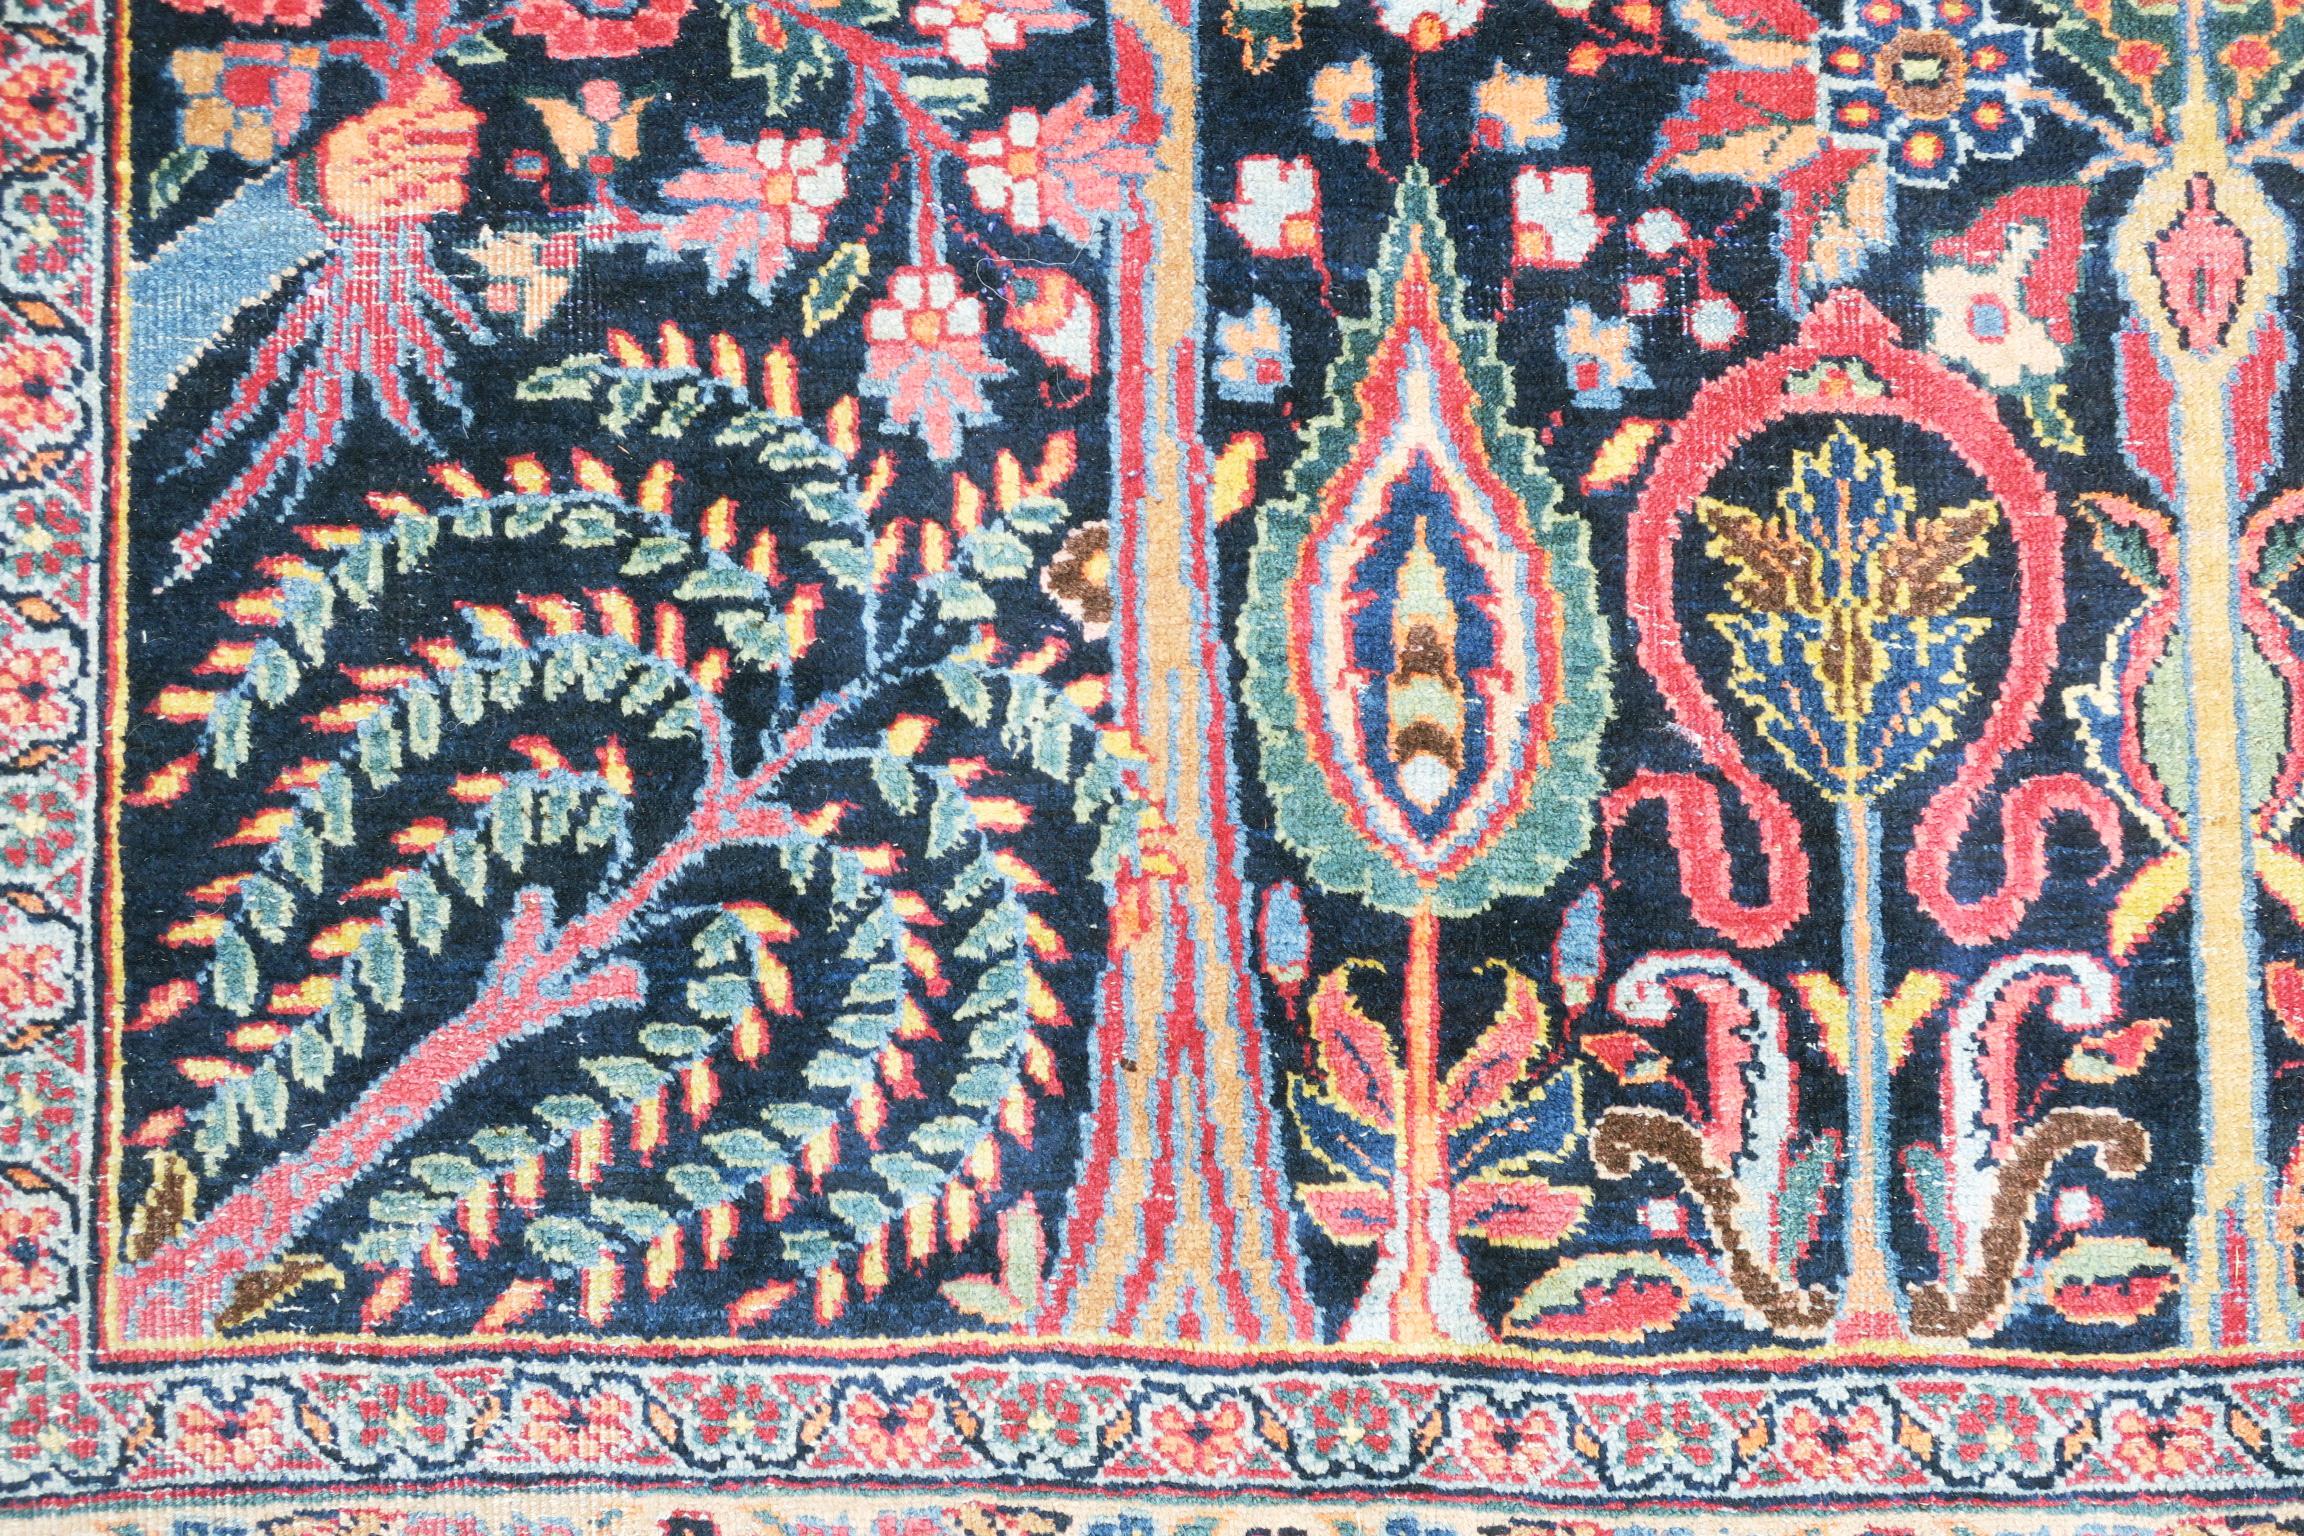 This is a very special rug with a tree of life design, dating from circa 1910, inscribed at one end and clearly commissioned for a special event. The tree is in full bloom and the design contains a forest of smaller trees and shrubs bursting with